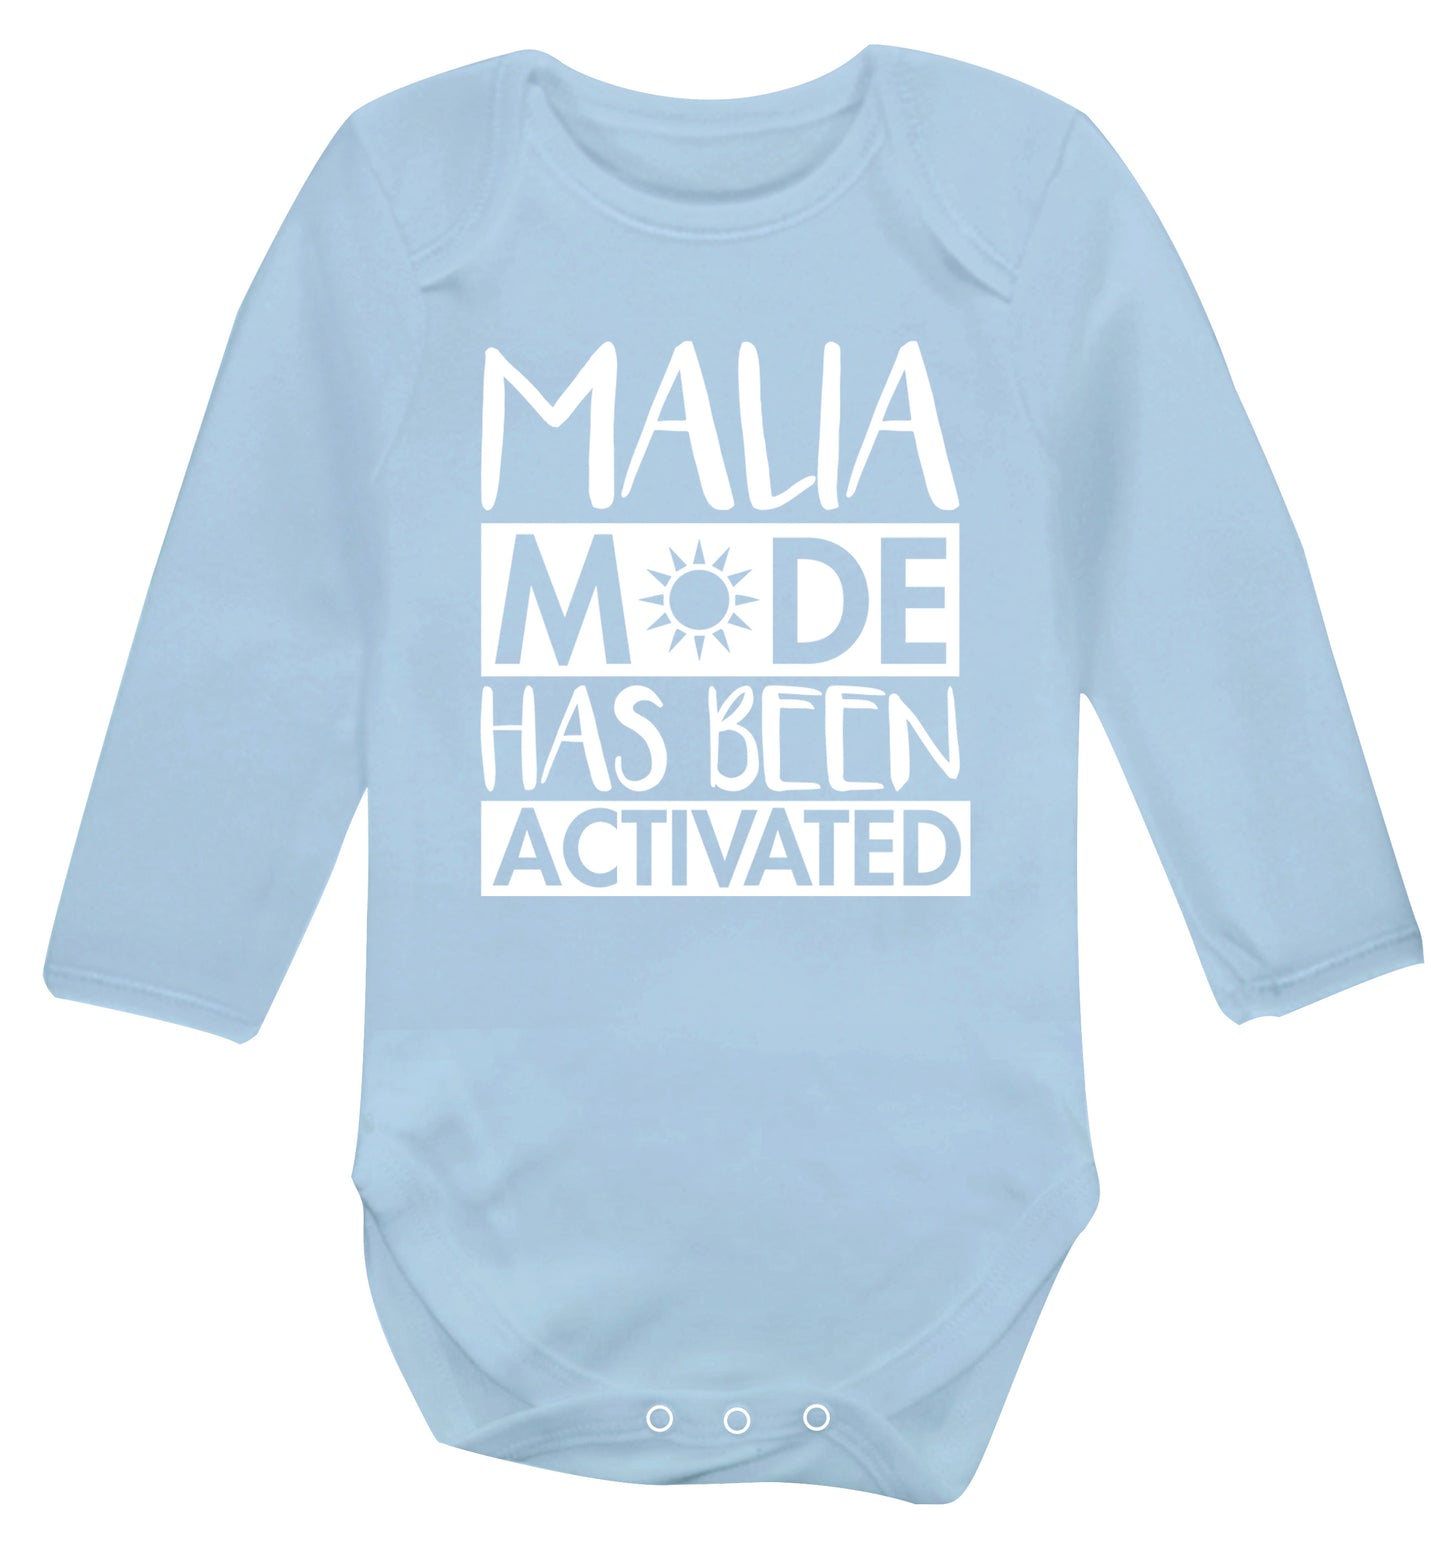 Malia mode has been activated Baby Vest long sleeved pale blue 6-12 months